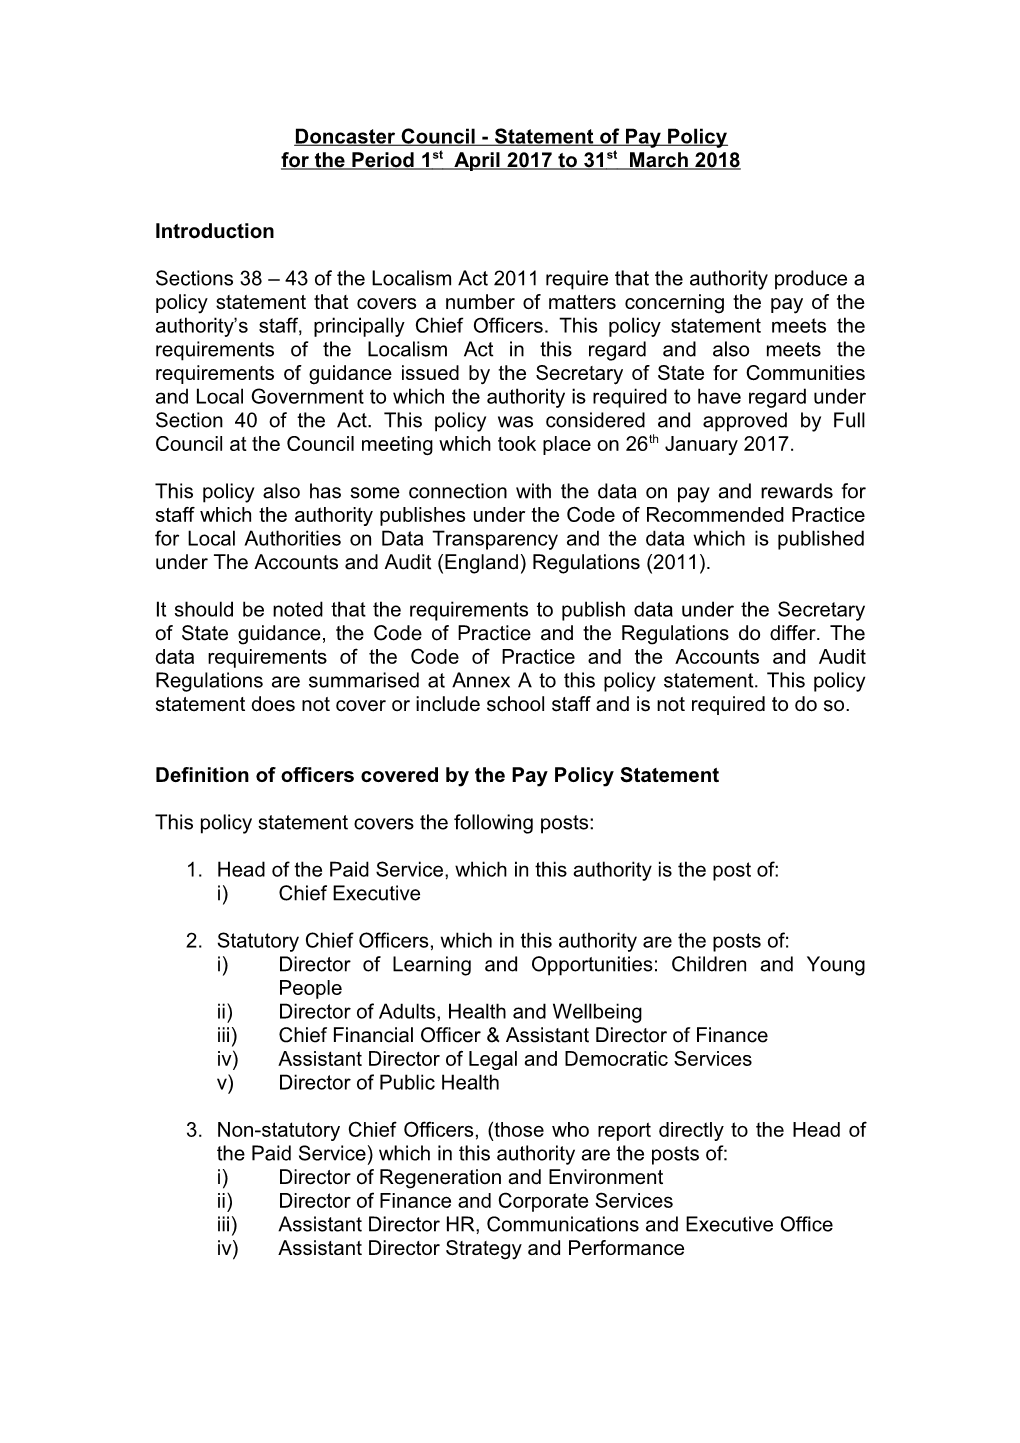 Council Statement of Pay Policy for the Period 1 April 2012 to 31 March 2013